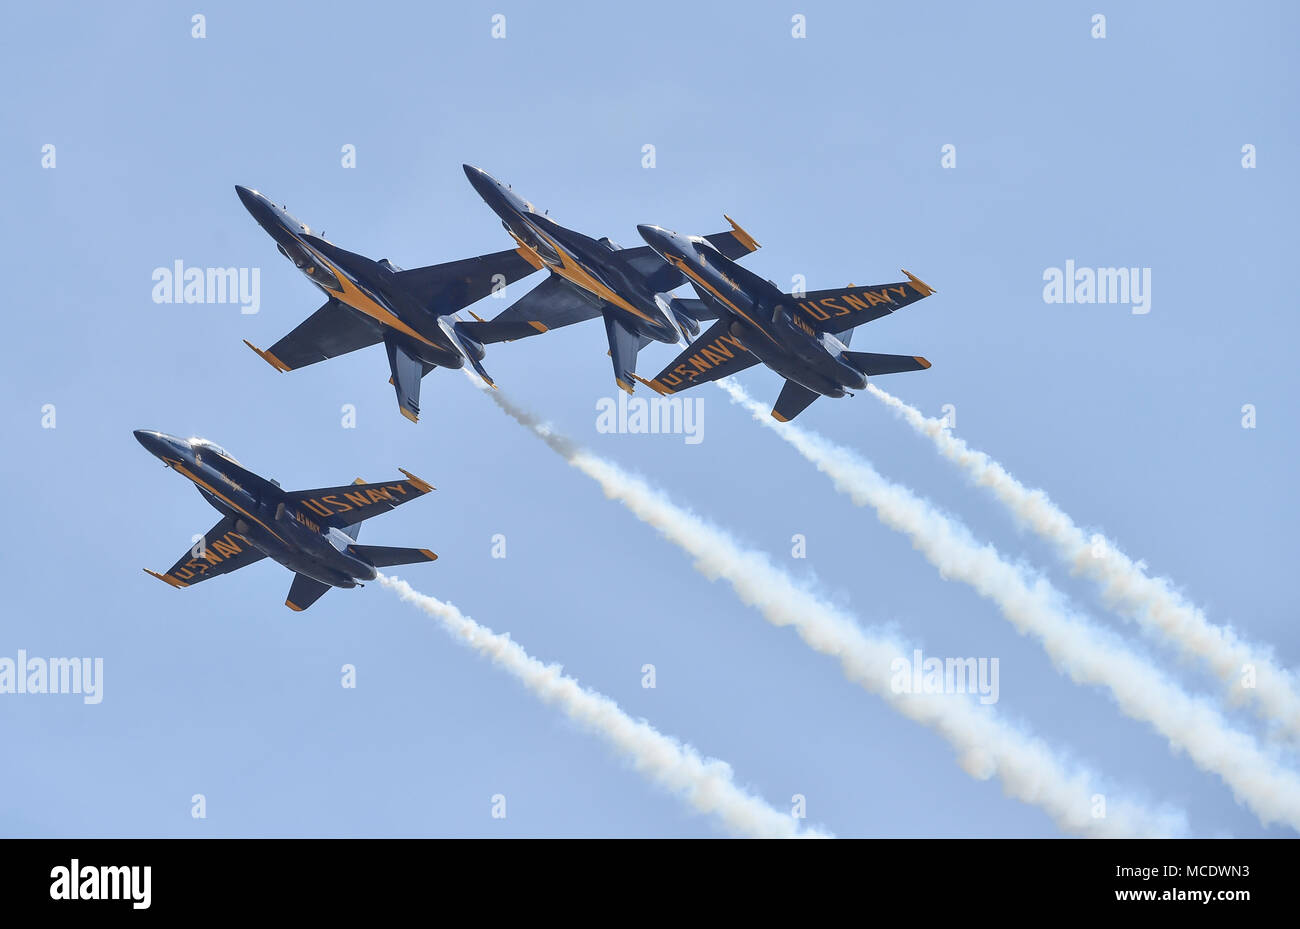 180412-N-NI474-2205  TUSCALOOSA, Ala. (April 12, 2018) The U.S. Navy flight demonstration squadron, the Blue Angels, Diamond pilots perform the Double Farvel maneuver during a practice demonstration for the Tuscaloosa Regional Air Show. The Blue Angels are scheduled to perform more than 60 demonstrations at more than 30 locations across the U.S. and Canada in 2018. (U.S. Navy photo by Mass Communication Specialist 1st Class Daniel M. Young/Released) Stock Photo